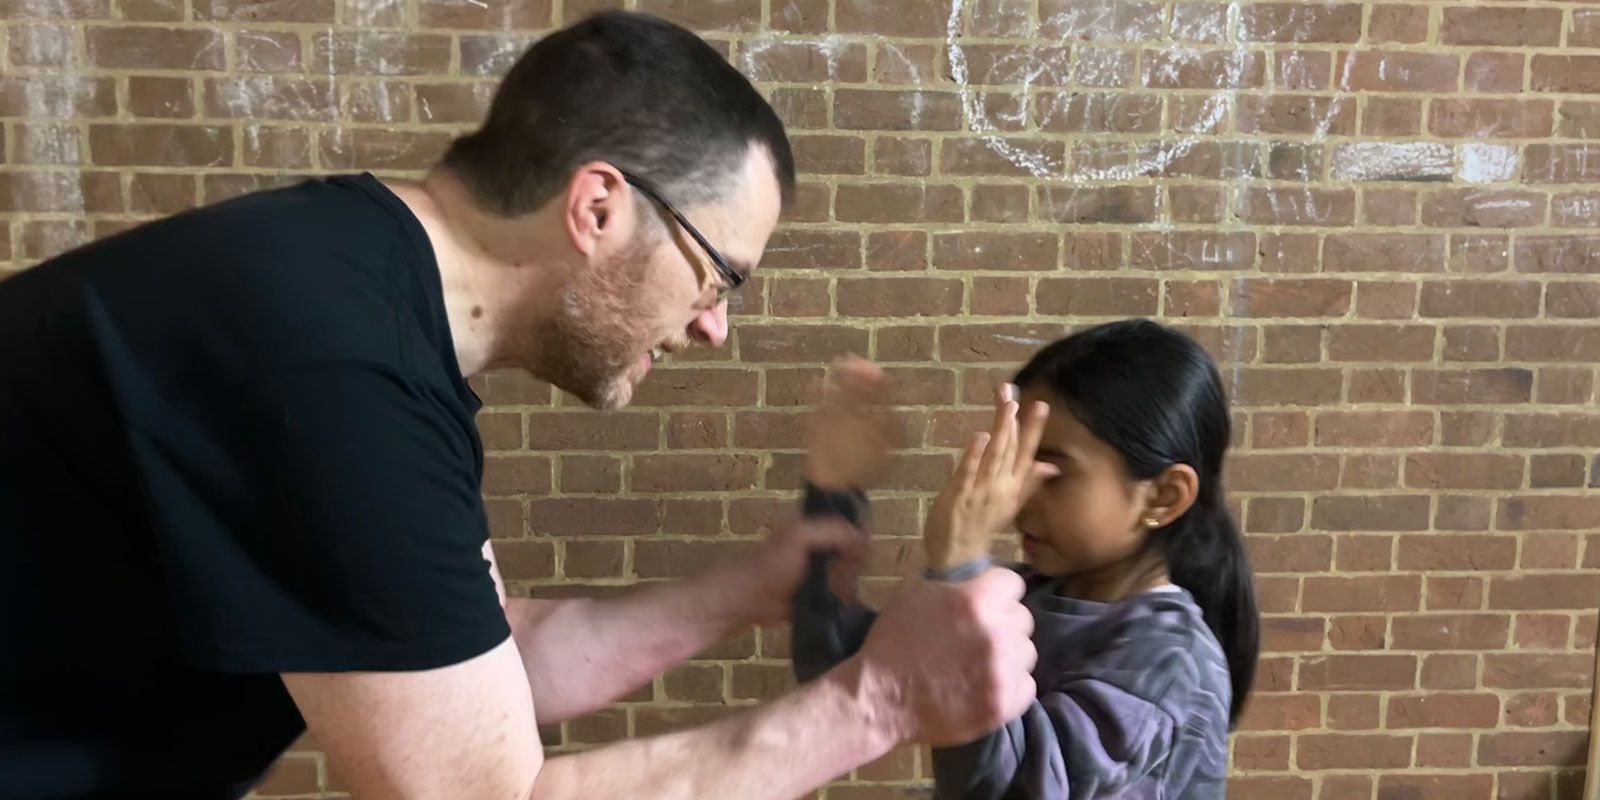 A threatening man holding a child by her wrists